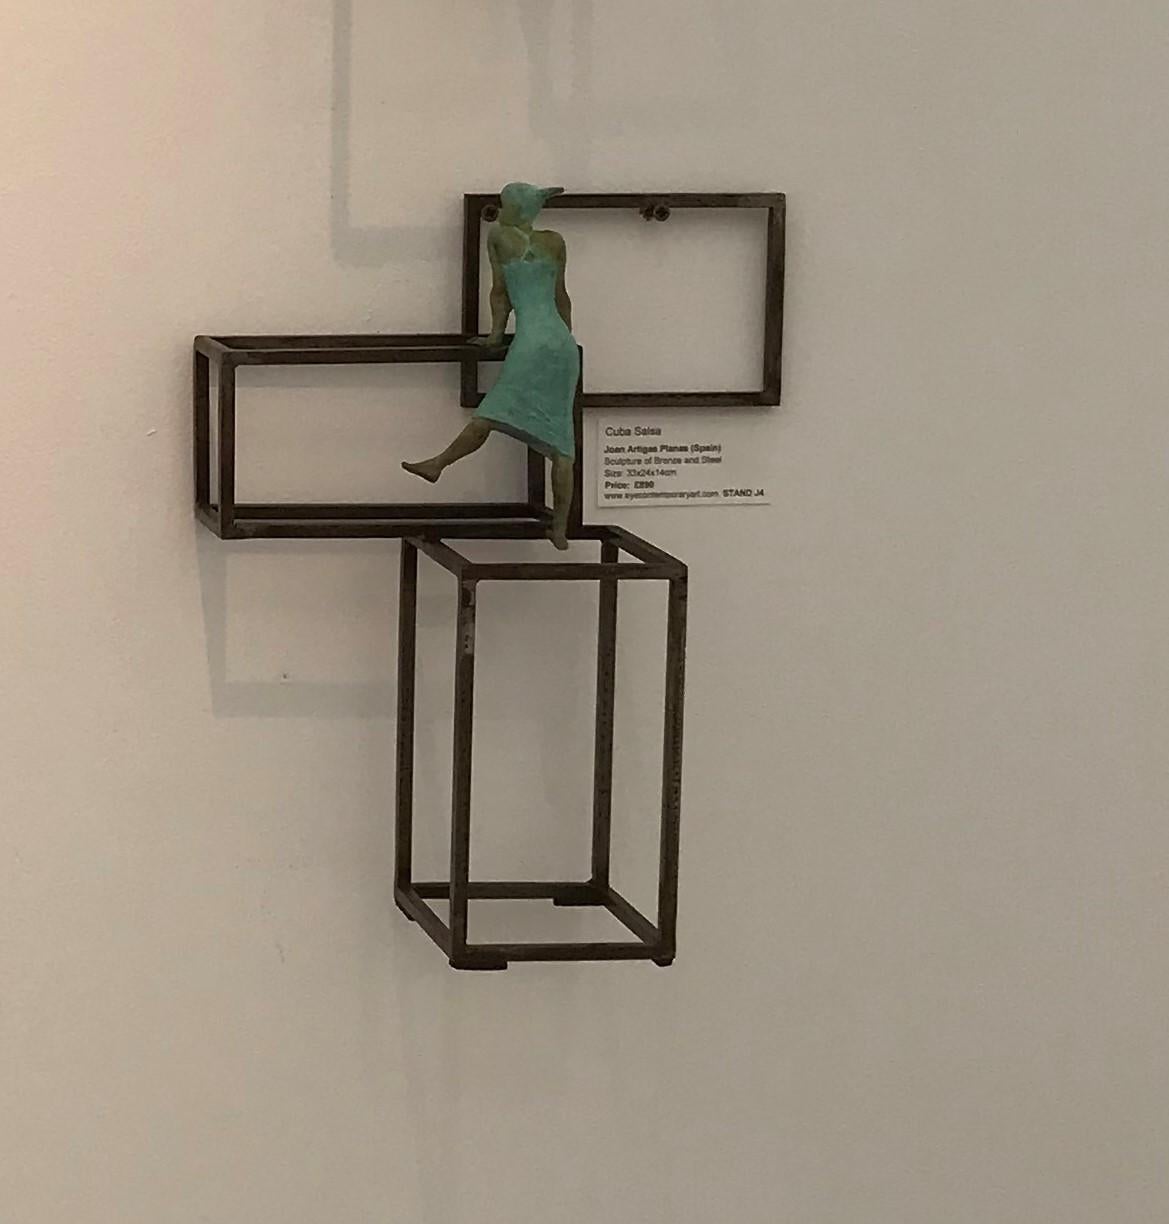 Cuba Salsa (Small) is a bronze sculpture with green patina, it is connected to a steel base. The edition size is 50. This sculpture stands on shelf as well as be hung on wall. This sculpture is part of the Cuba Series of Joan Artigas which is